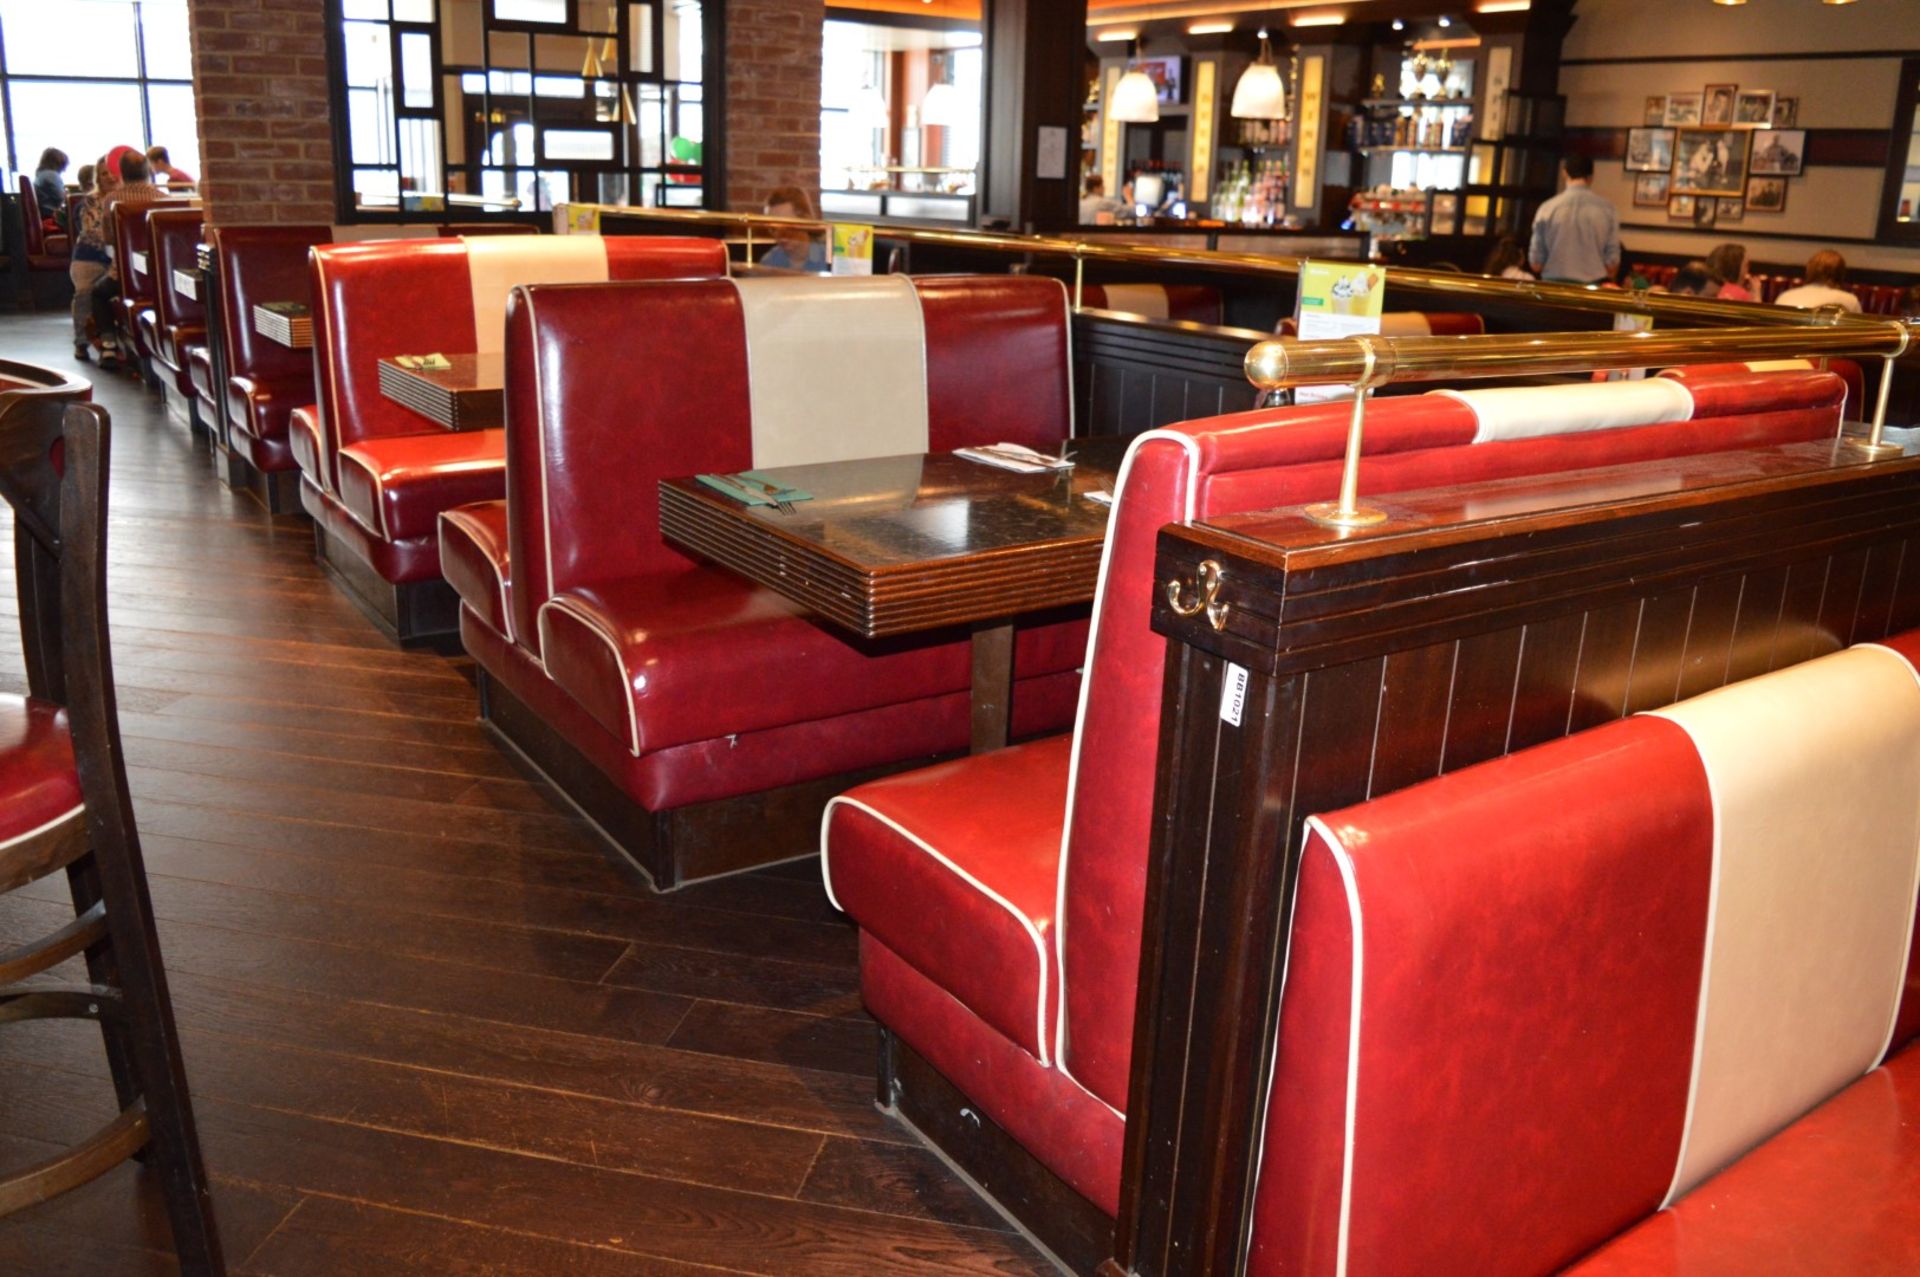 1 x Selection of Seating Booths in a 1950's Retro American Diner Design Supplied in Good Condition - - Image 3 of 7